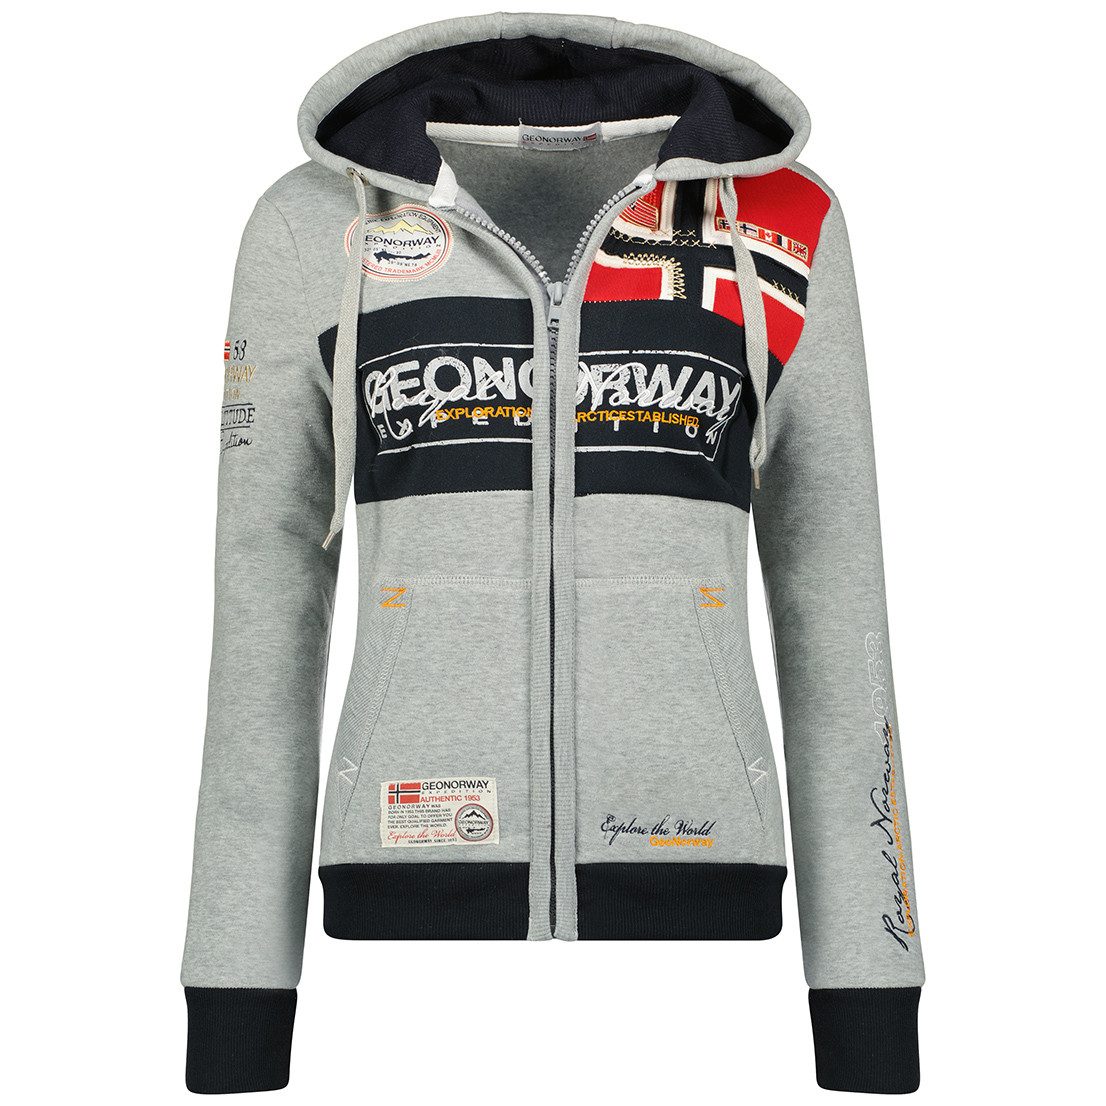 Geographical Norway Funktionsjacke Geographical Norway Damen 017 S / 36 Hellgrau